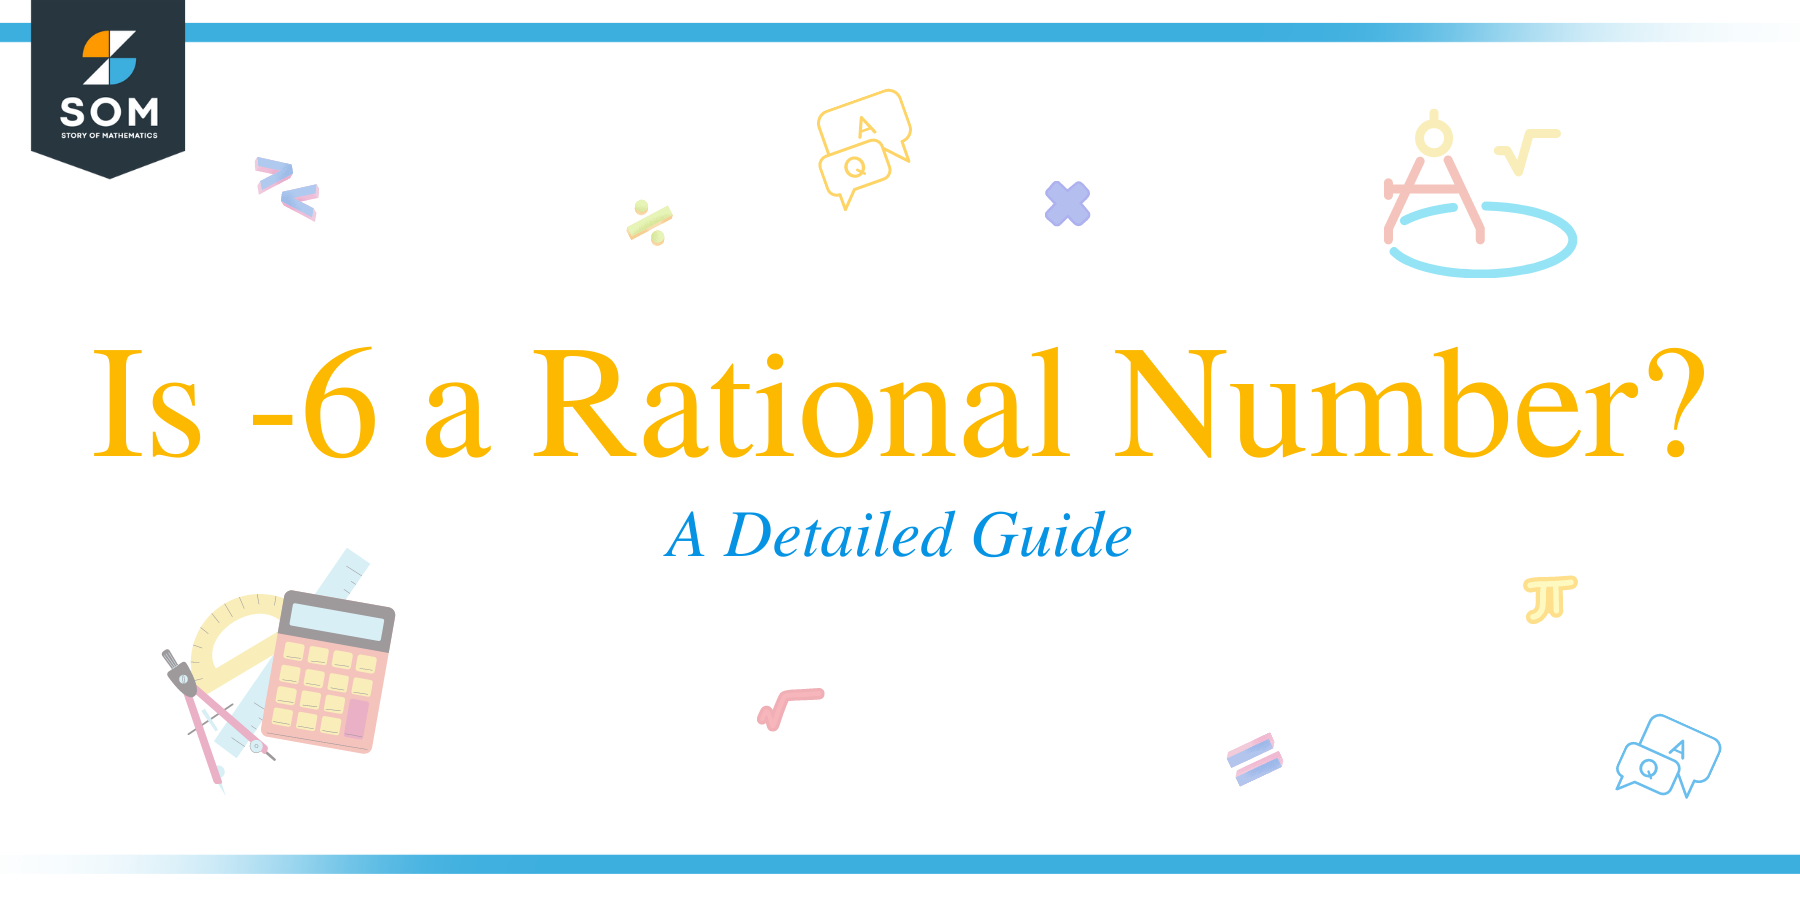 Is -6 a Rational Number?